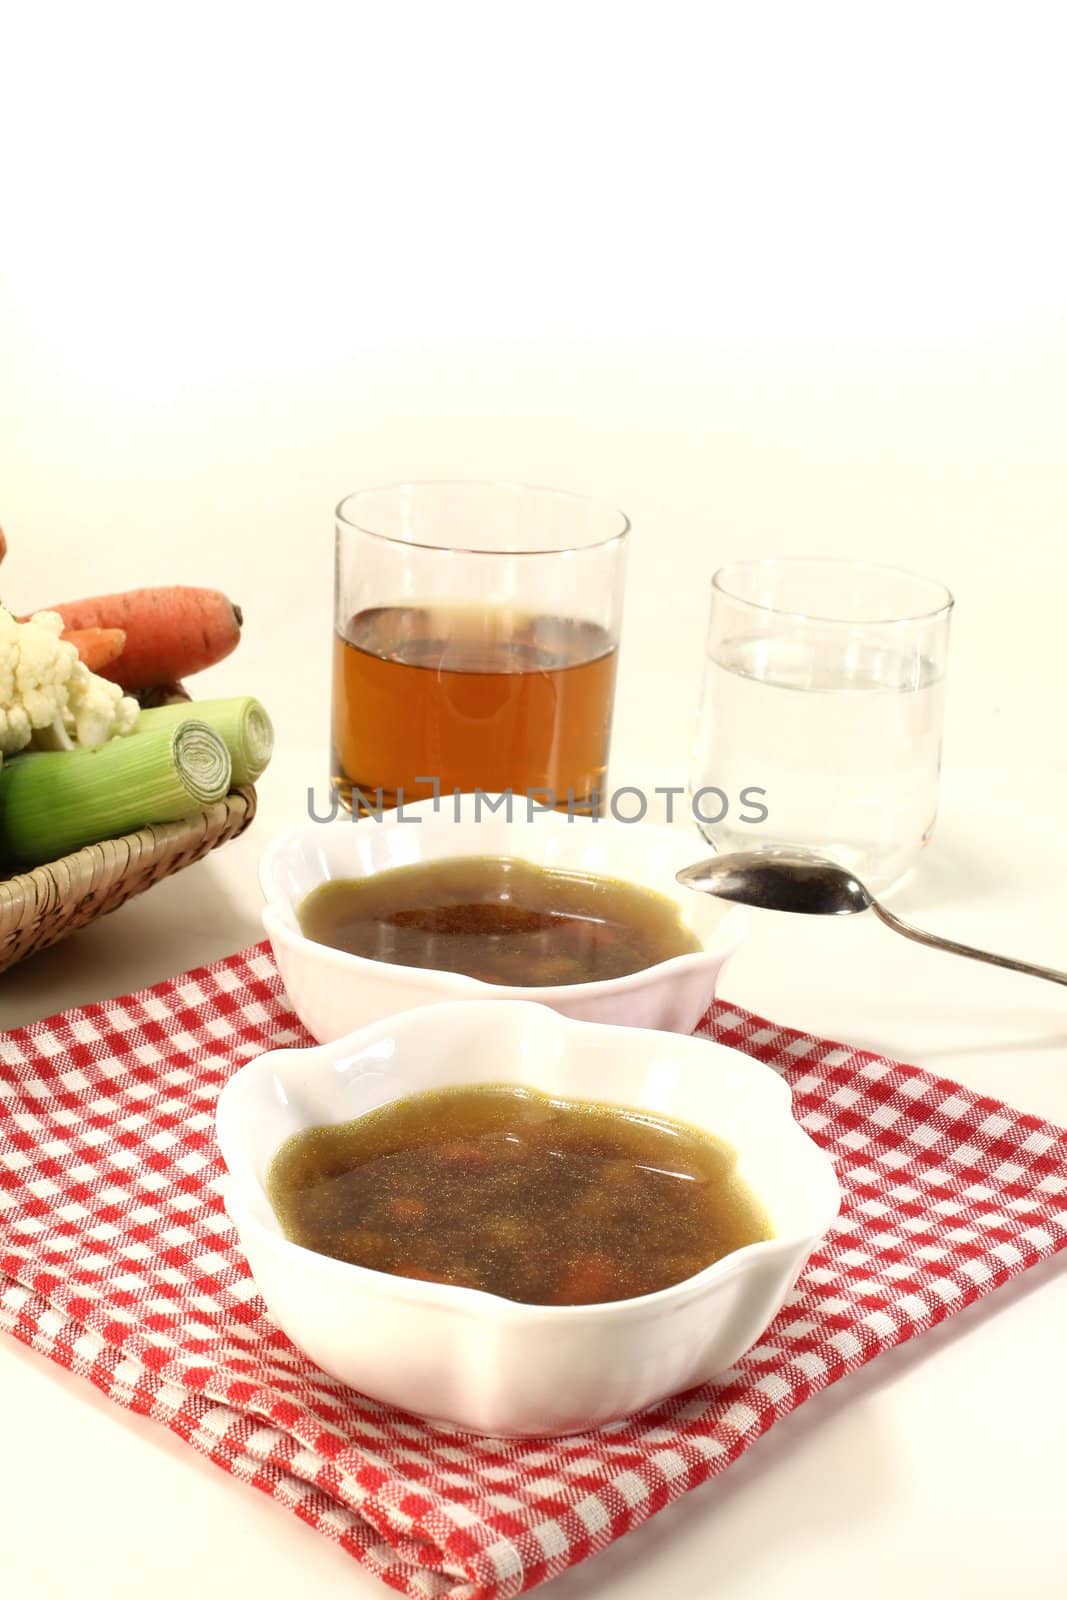 Beef consomme with vegetables by discovery